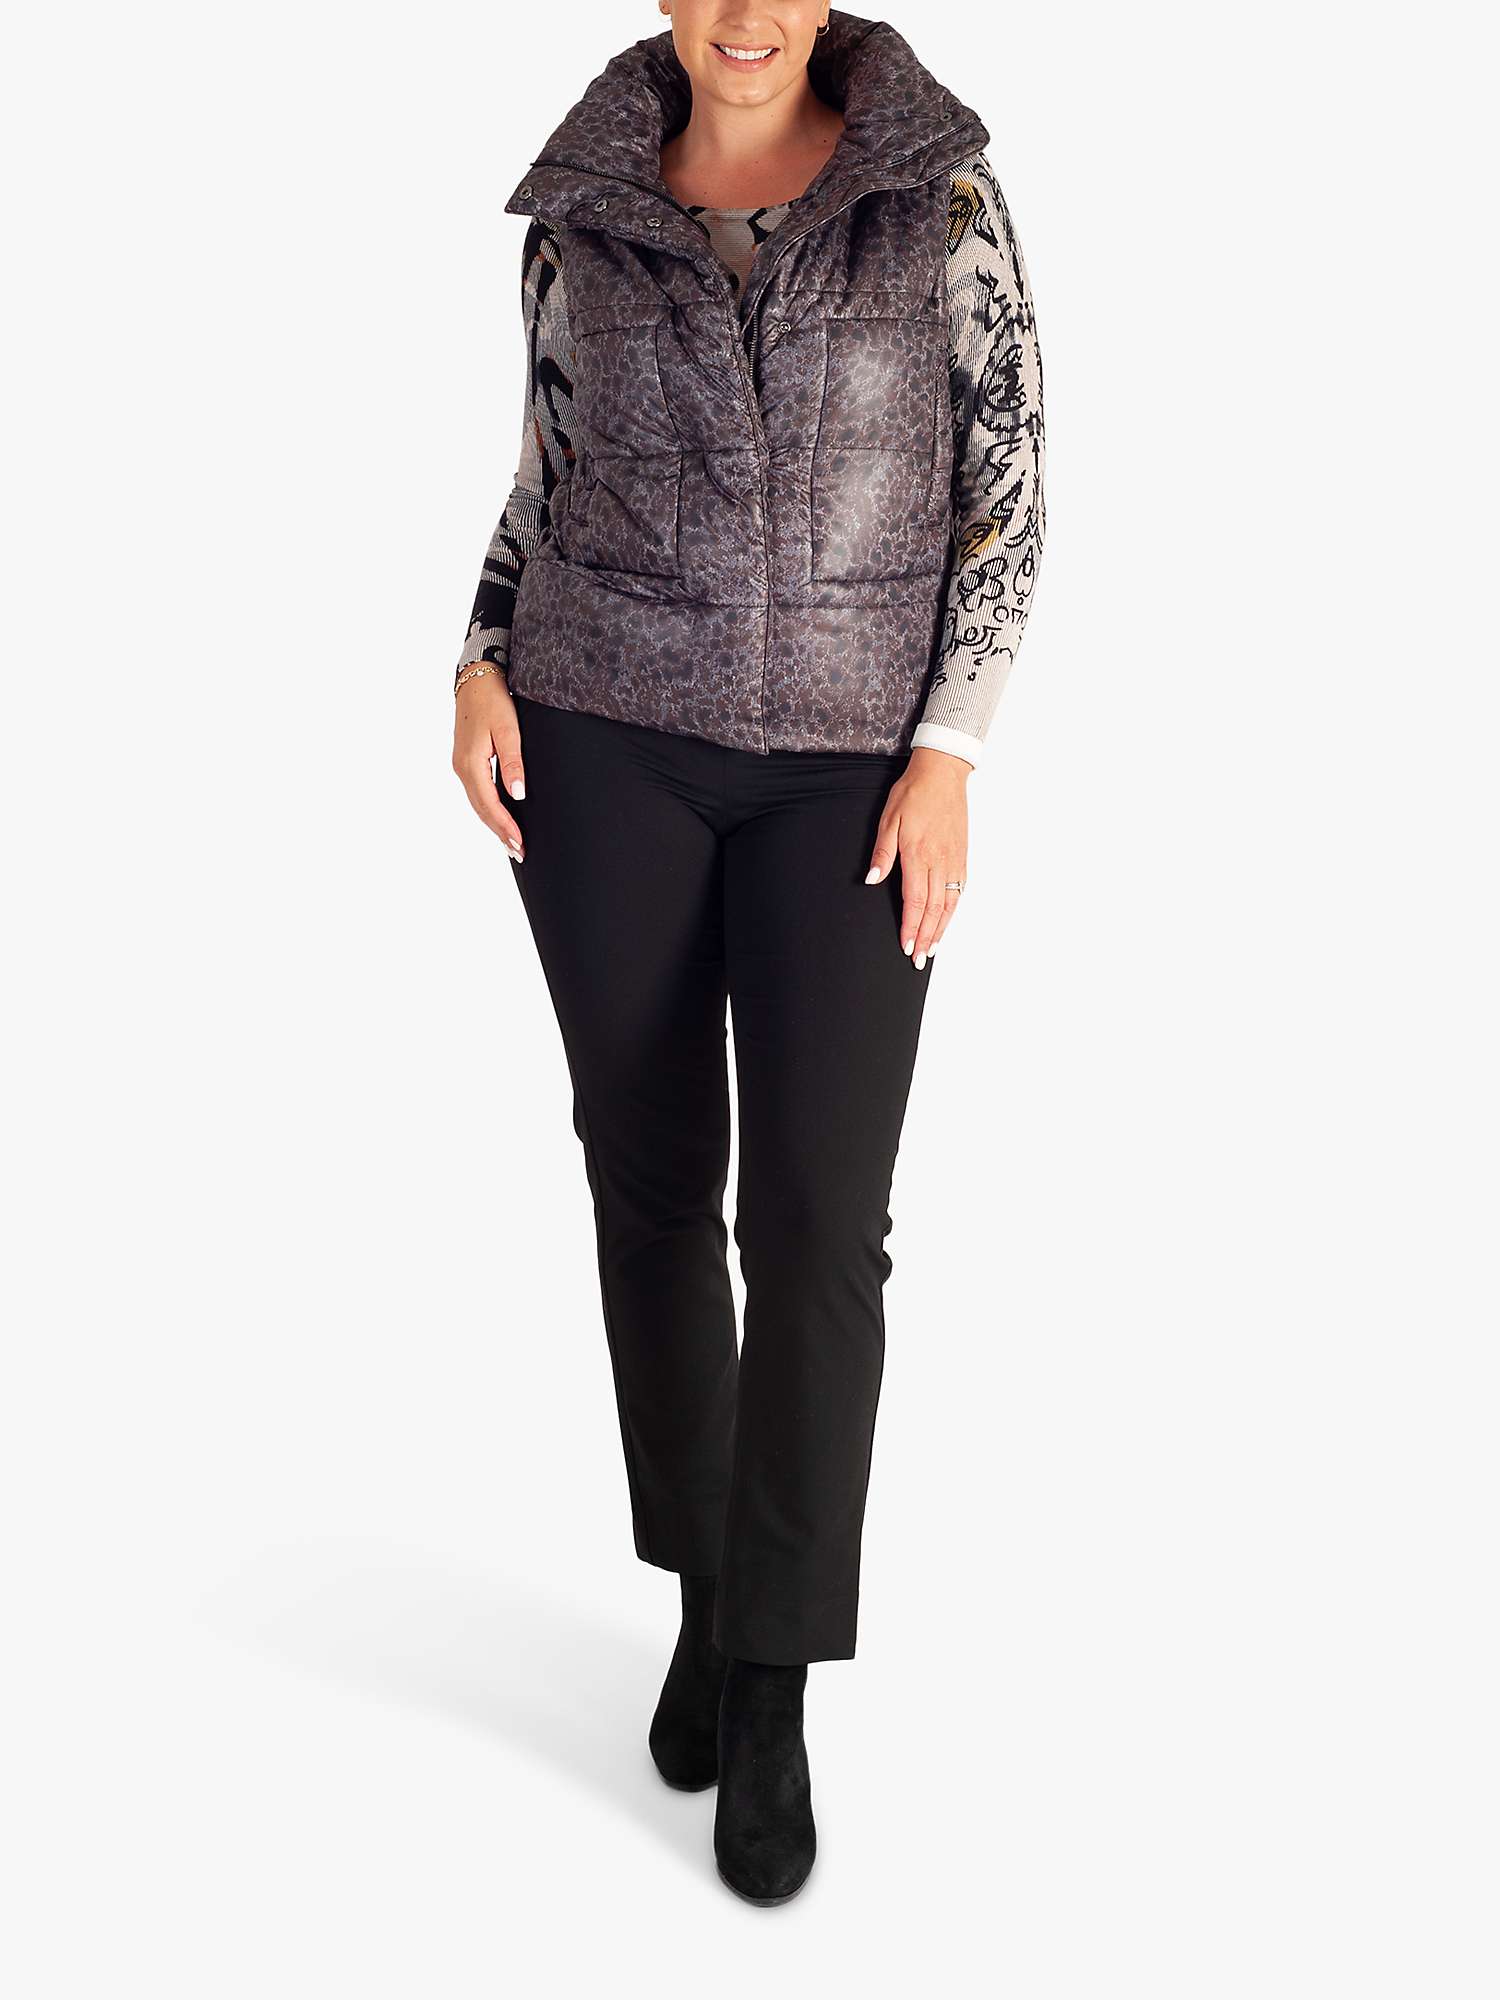 Buy chesca Quilted Animal Print Gilet, Brown/Grey Online at johnlewis.com